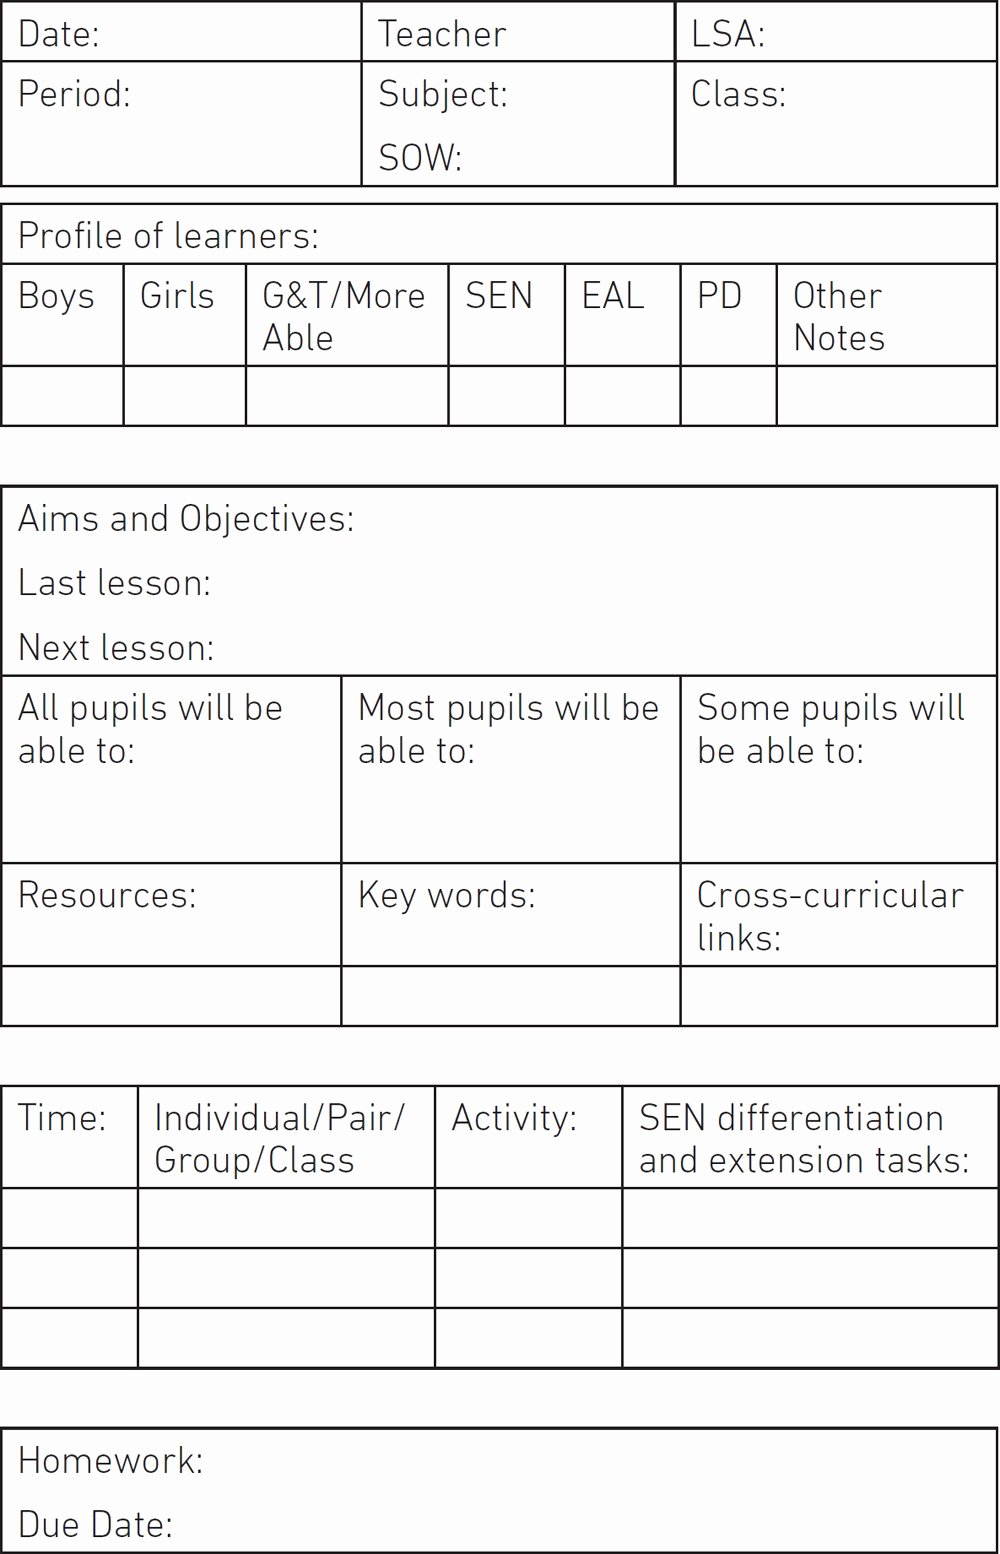 Workshop Model Lesson Plan Template Awesome Learn Model Lesson Plan Template – Learn Lesson Plan